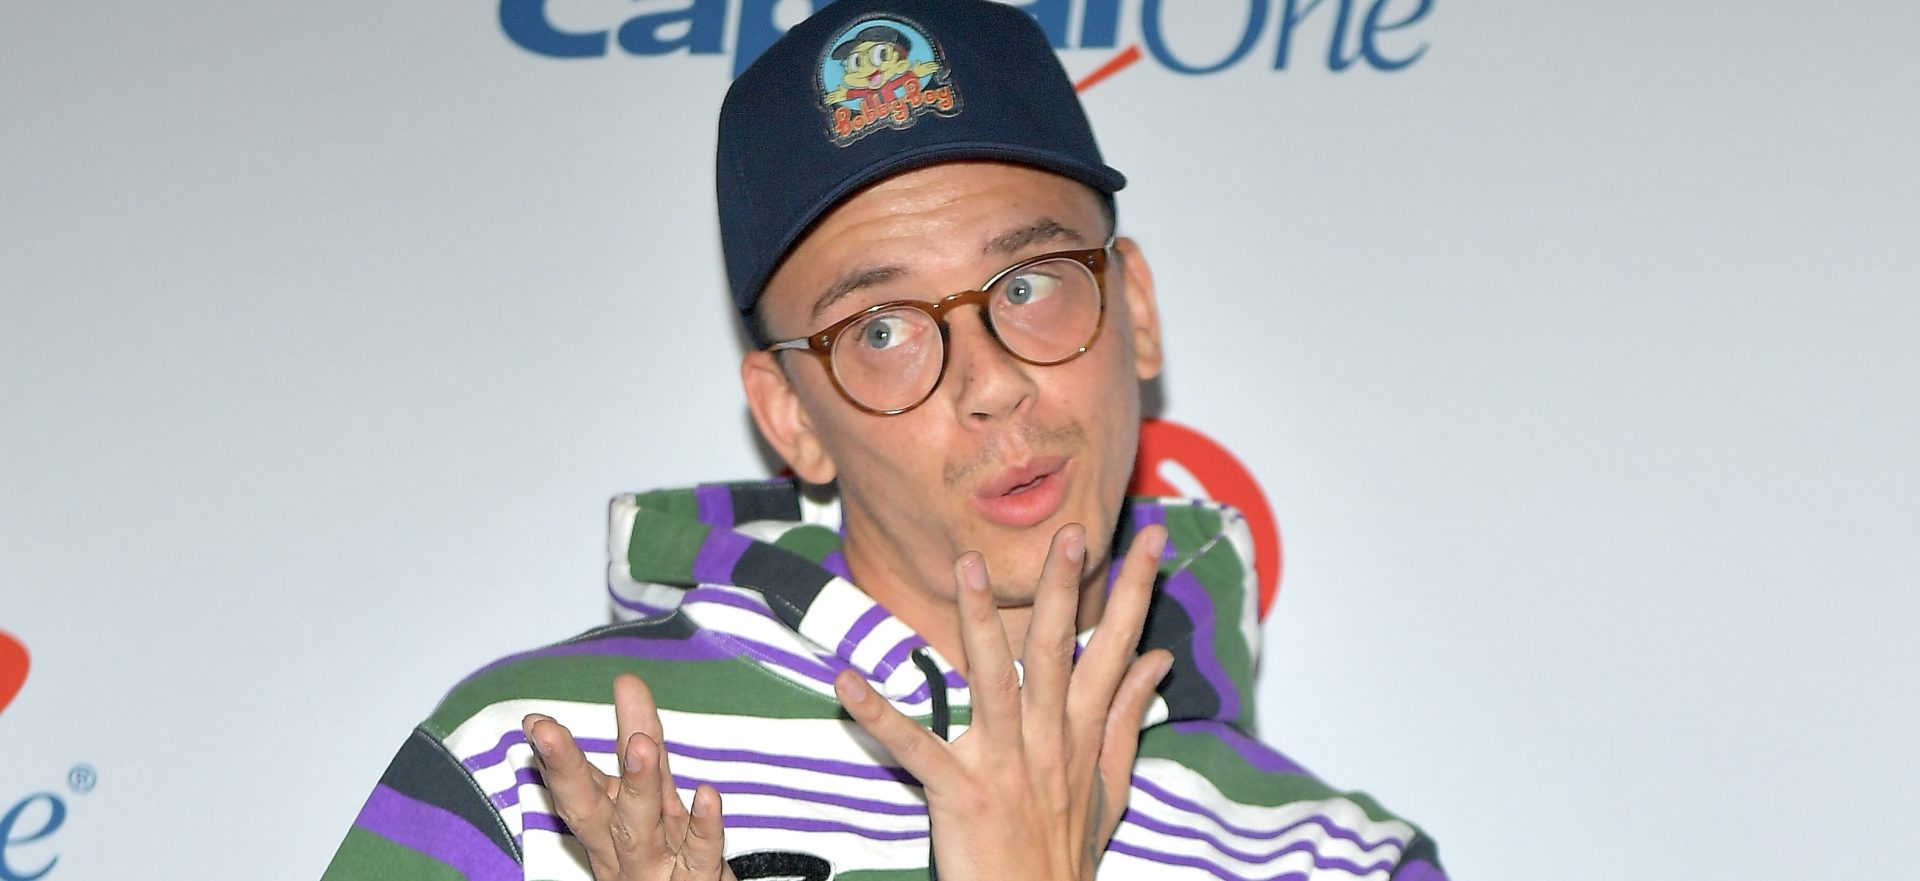 Hol’ Up! Rapper Logic Sparks Reactions For Saying N-Word While Showing Off His Dad Online